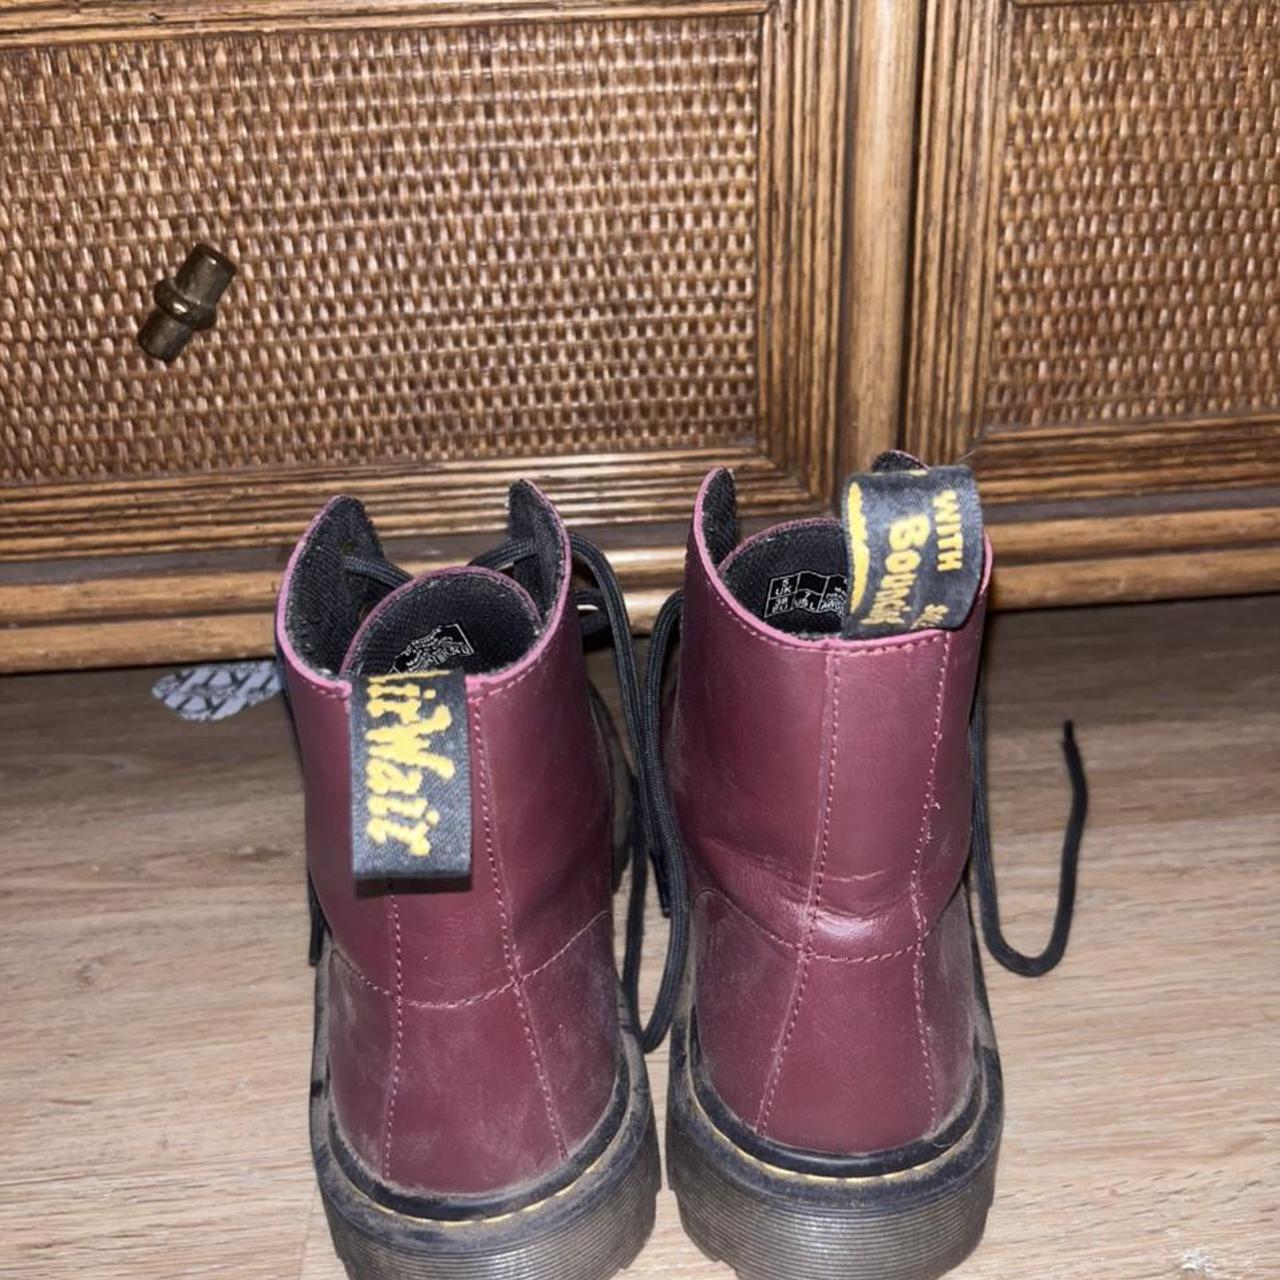 & Other Stories Women's Burgundy Boots (2)